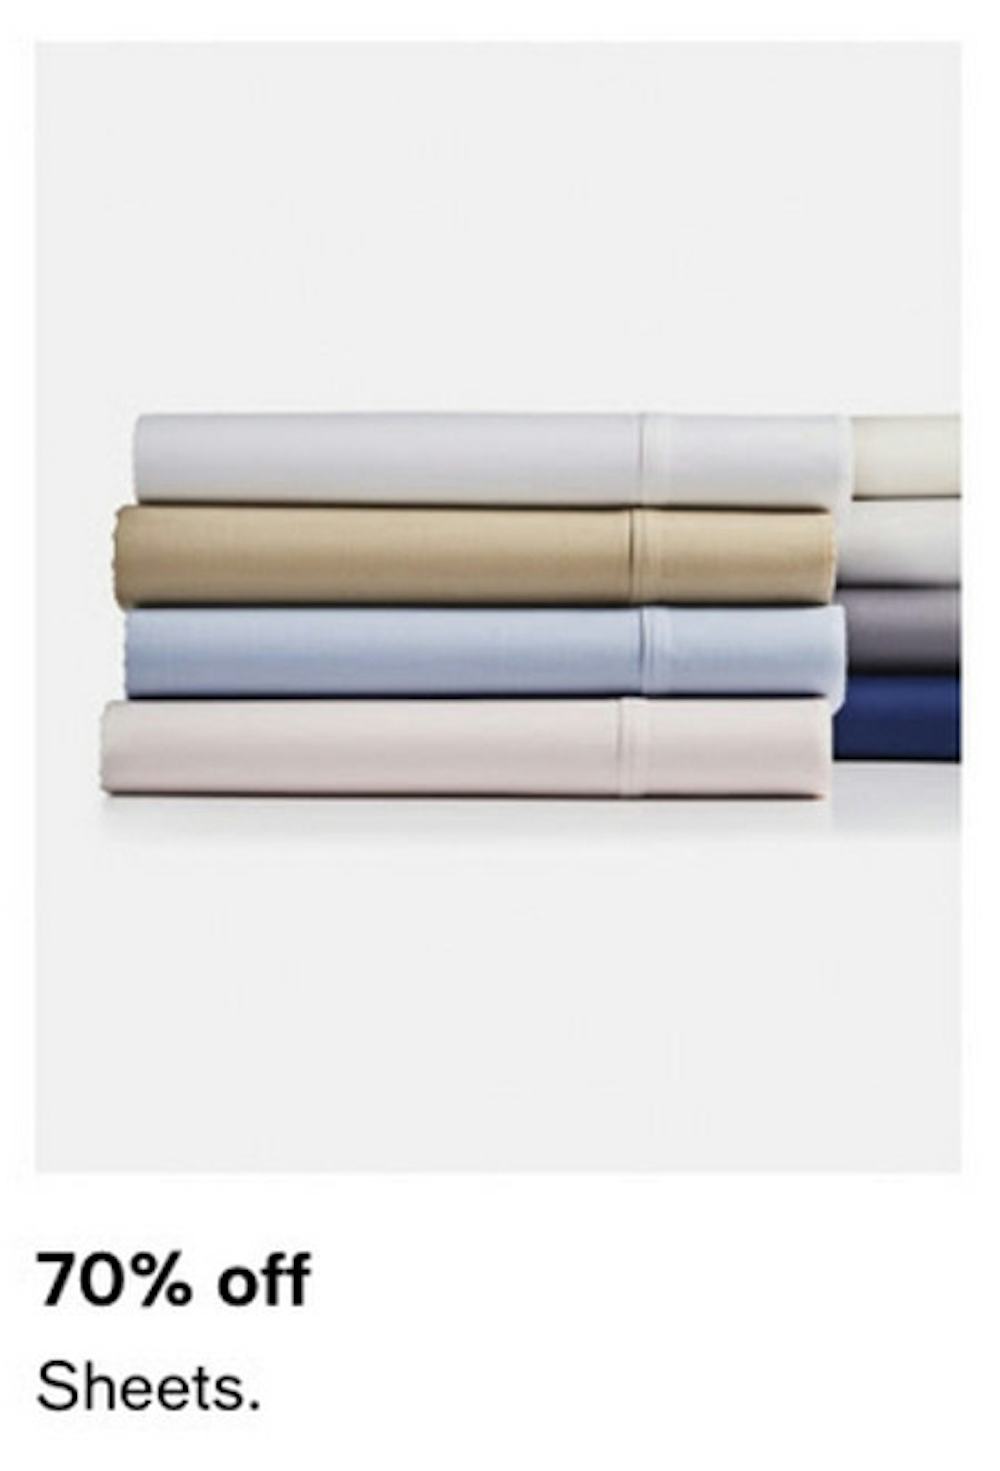 70% Off Sheets